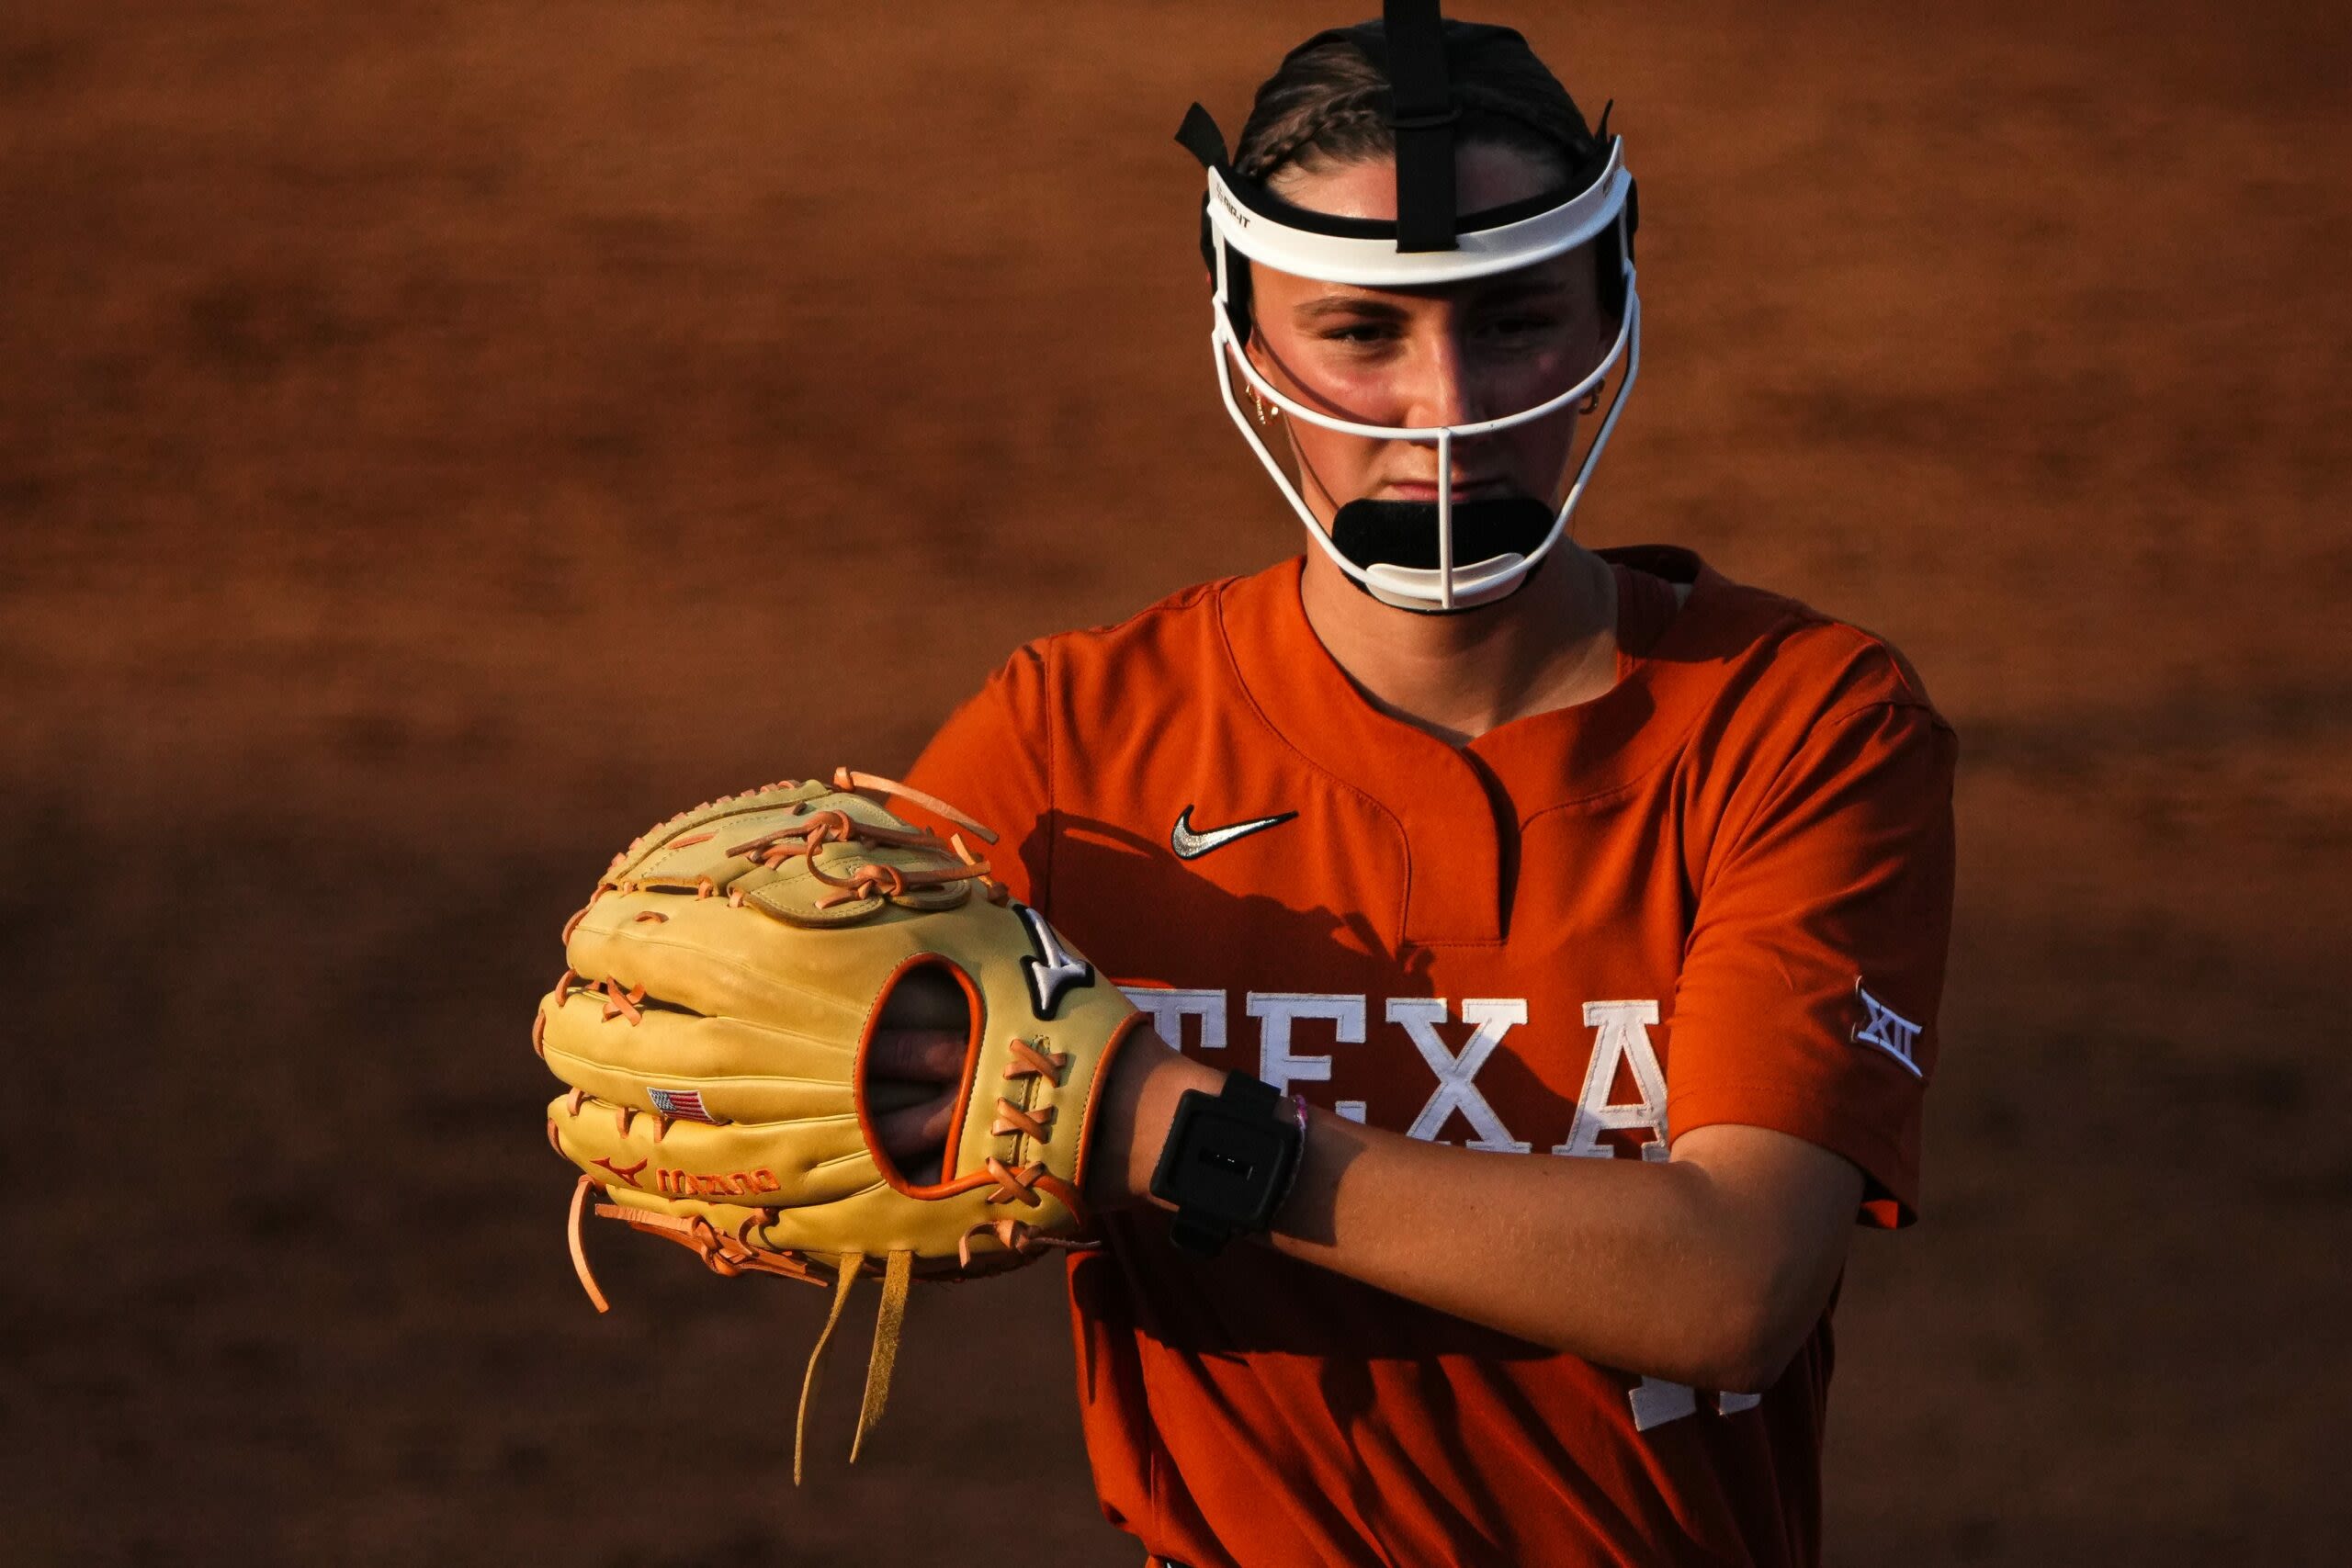 Teagan Kavan, Texas shuts out Stanford 4-0 in the Women’s College World Series